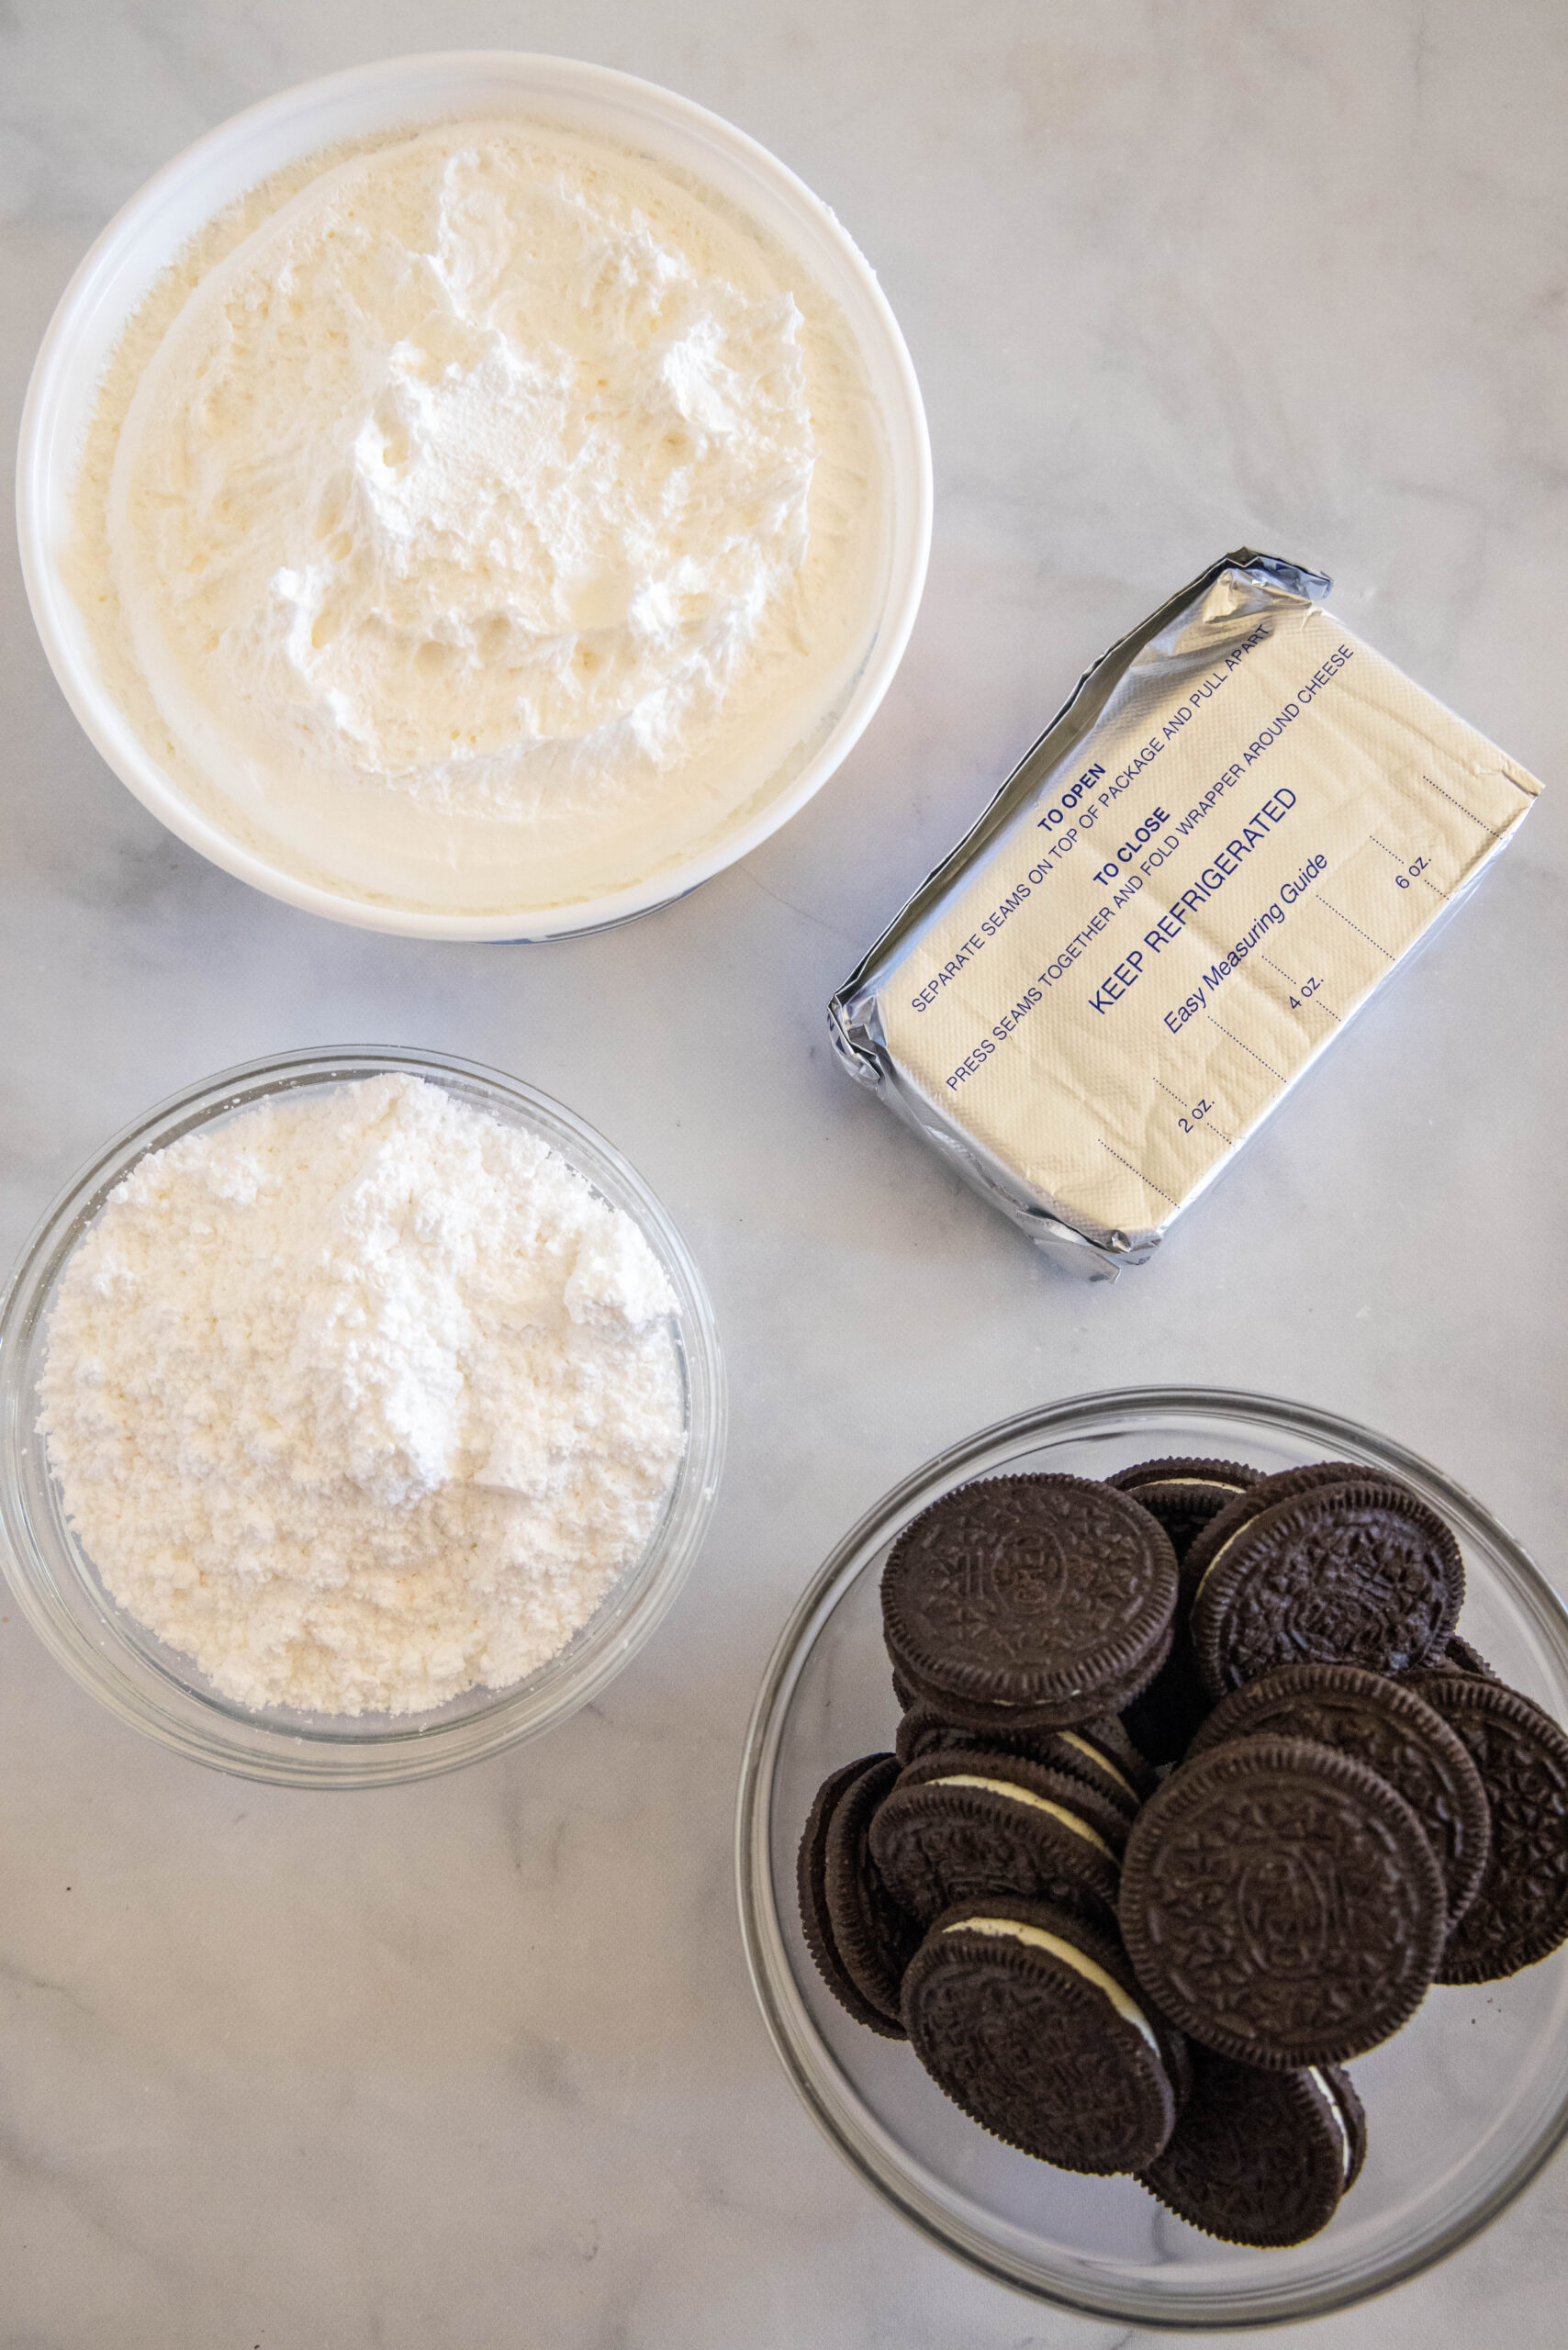 Ingredients for Oreo fluff.